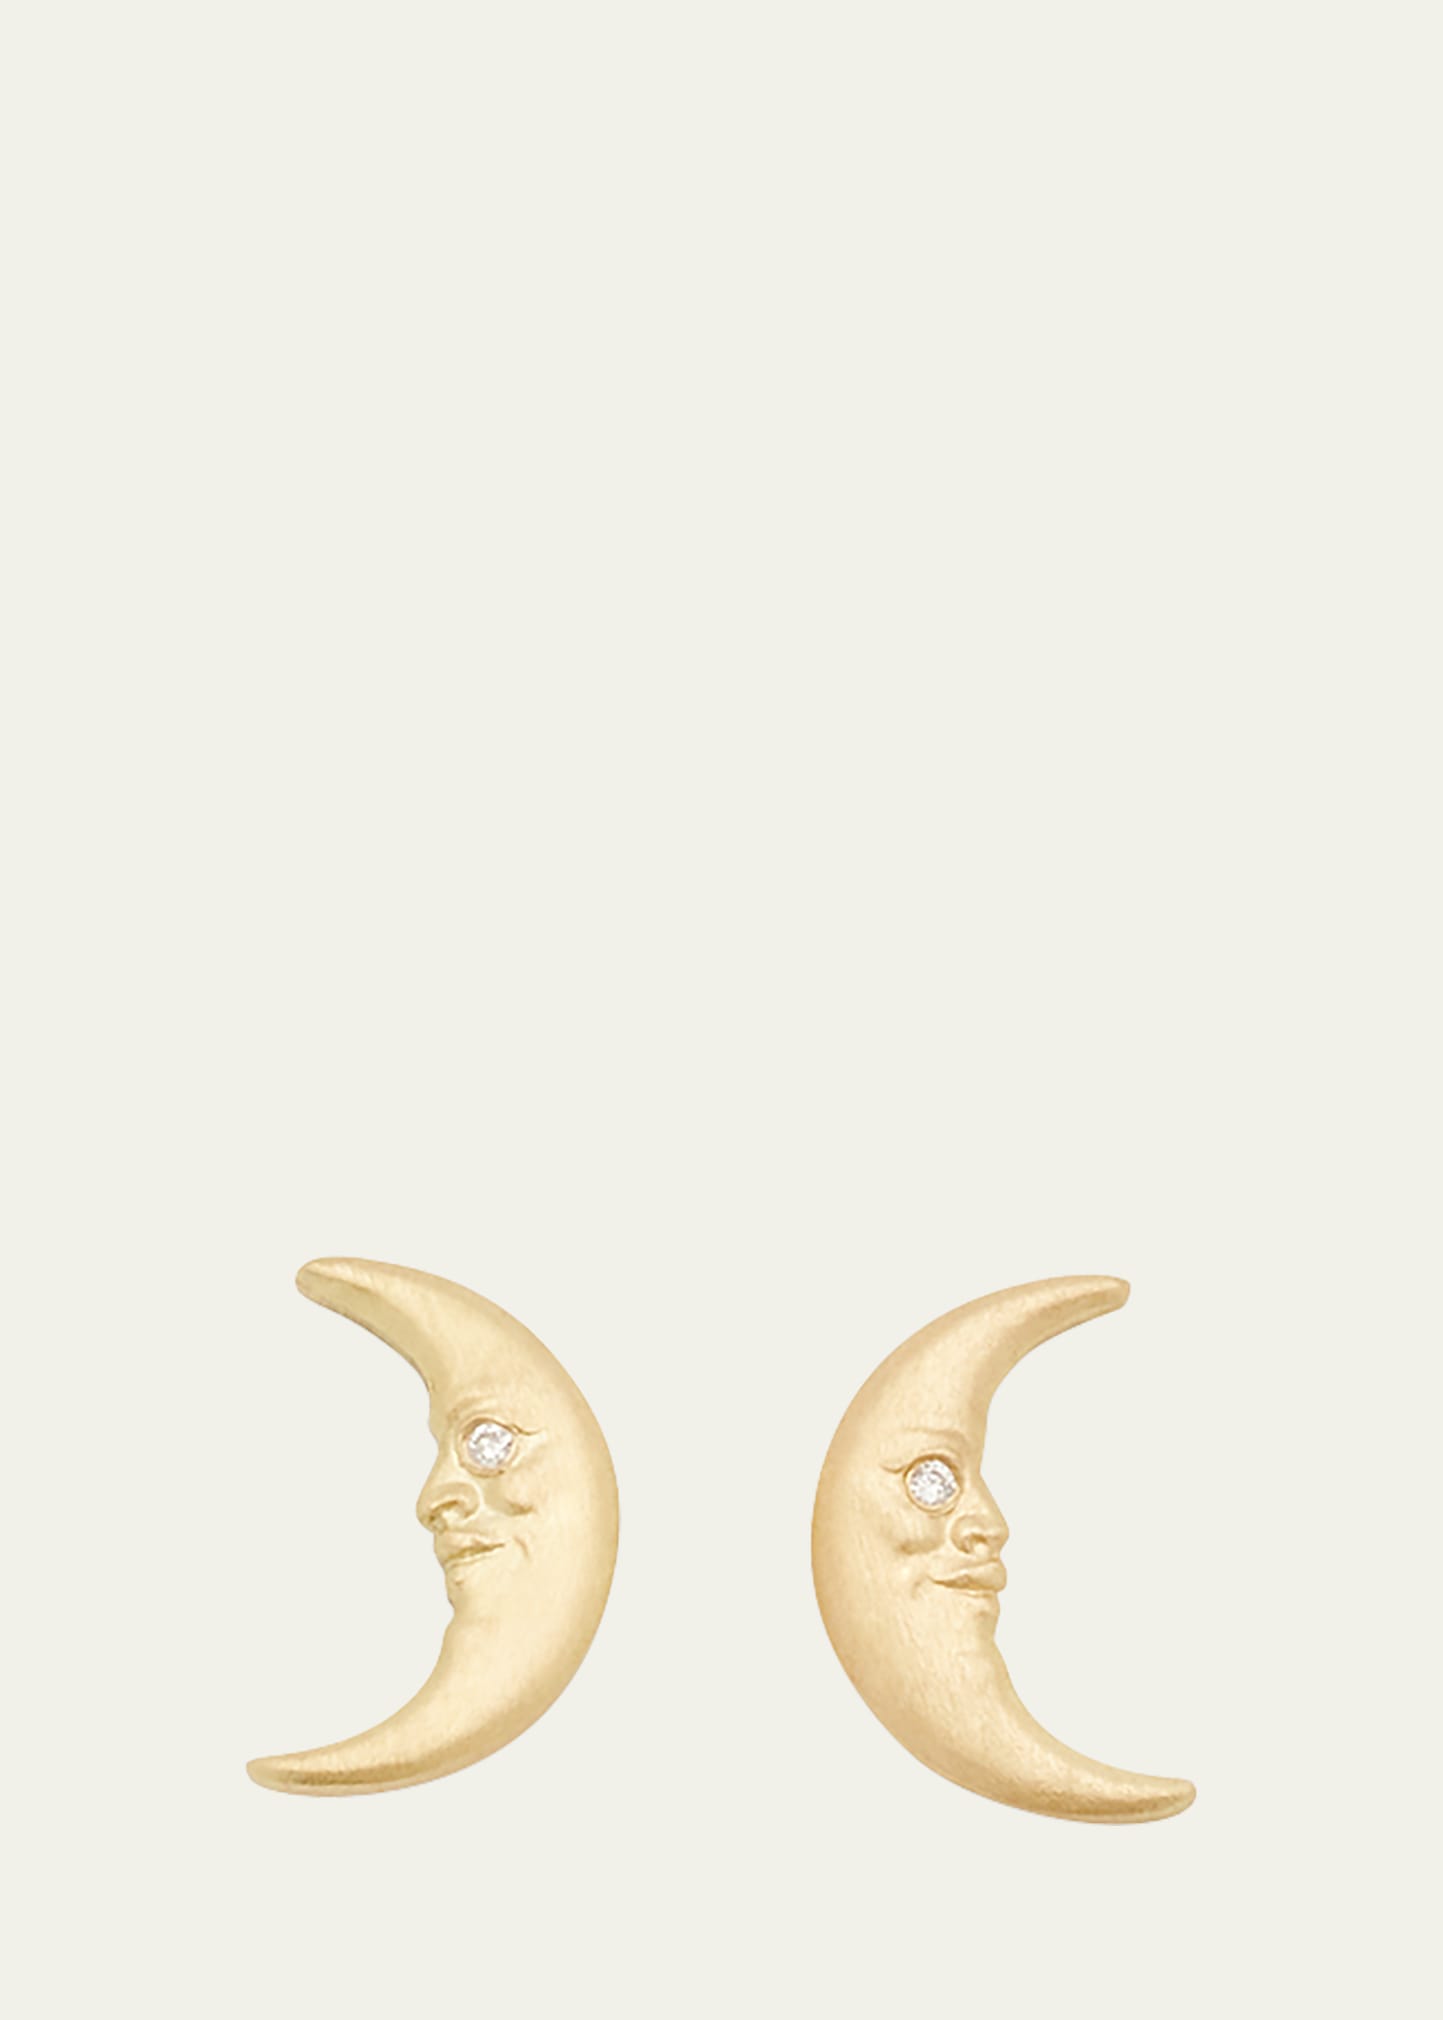 Anthony Lent Tiny Crescent Moonface Stud Earrings in 18k Gold with Diamonds